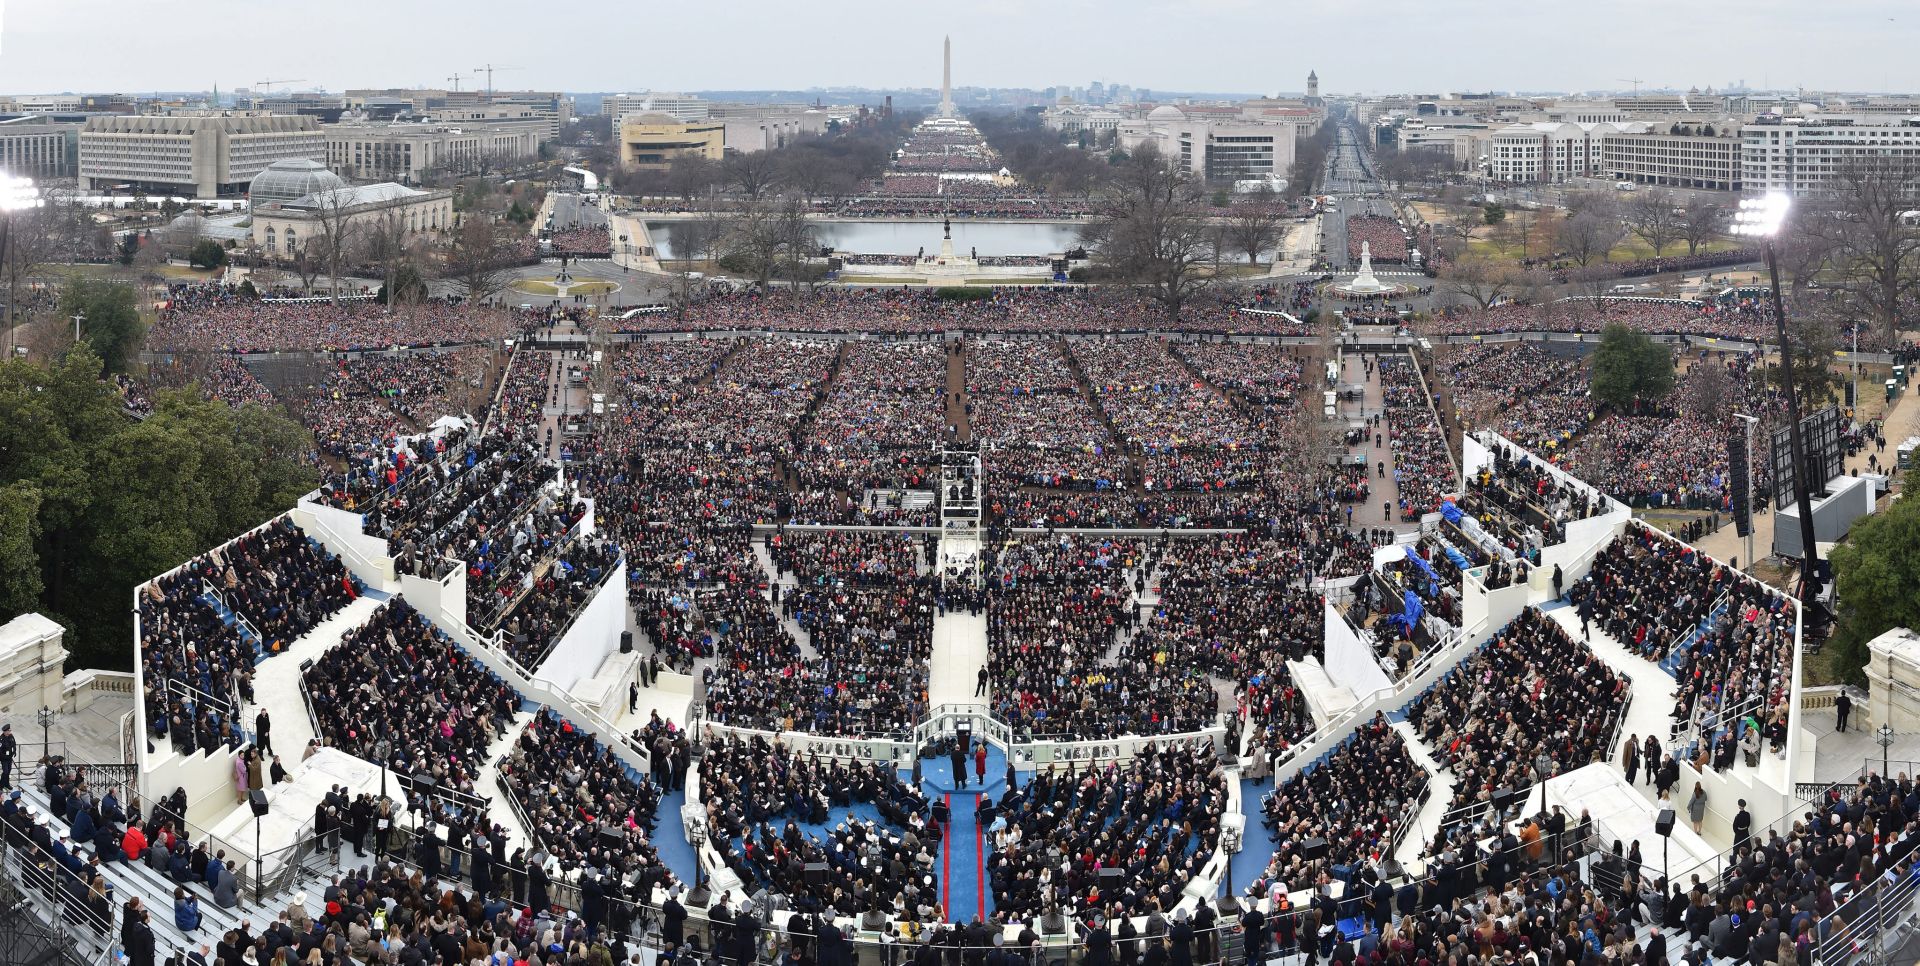 epa05736161 Panoramic of US President Donald J. Trump's Inauguration at the U.S. Capitol in Washington, DC, USA, 20 January 2017. Trump won the 08 November 2016 election to become the next US President.  EPA/RICKY CARIOTI / POOL